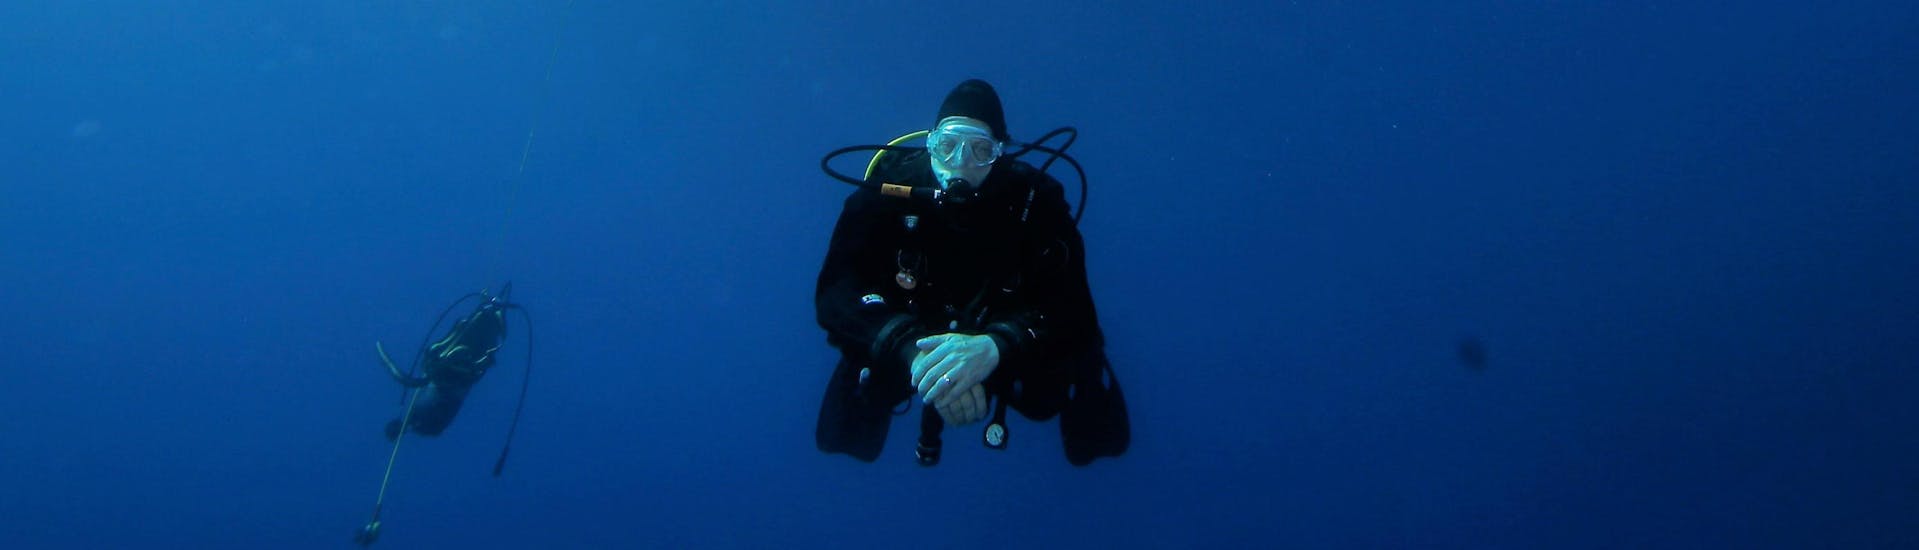 A participant of the Scuba Diving Course for Beginners - SSI Open Water Diver with Octopus Garden is diving in the blue ocean around Malta.